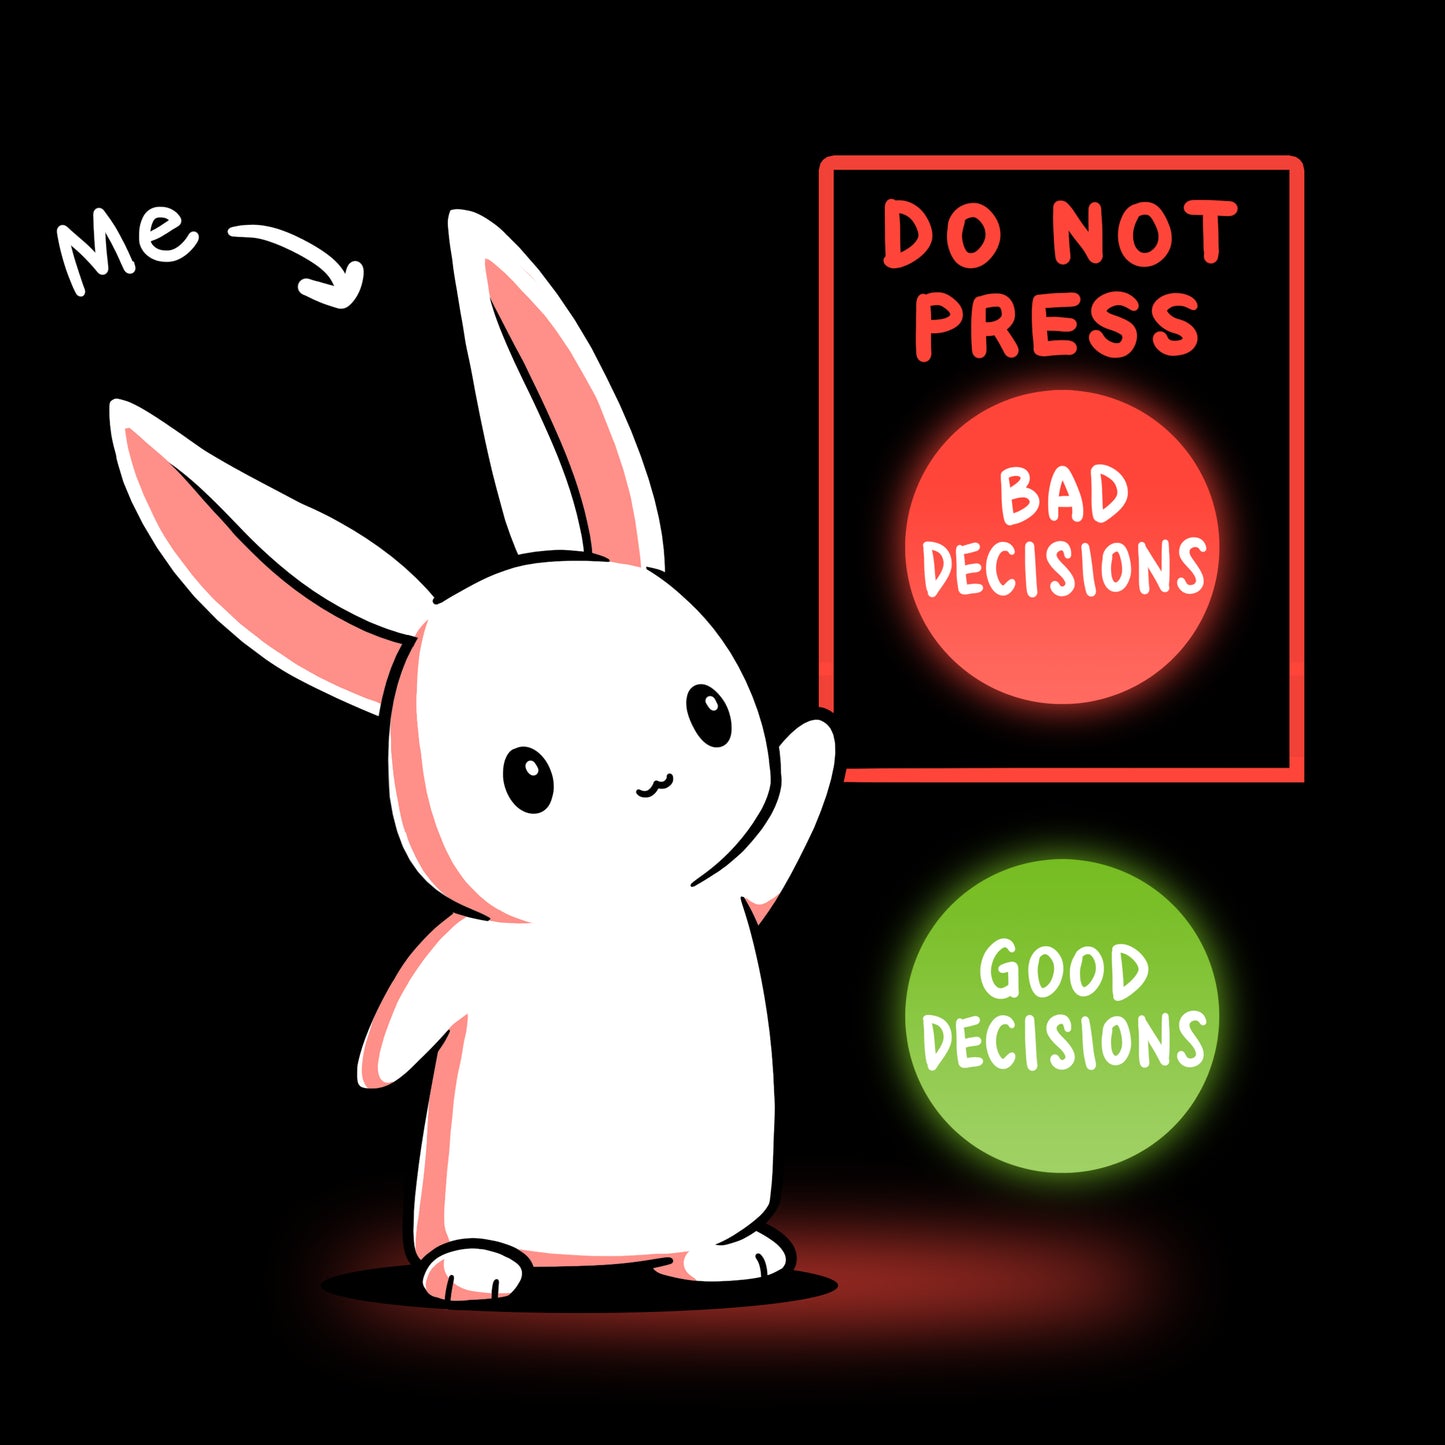 A TeeTurtle Bad Decision Bunny wearing a T-shirt warns against making bad life choices with a sign.